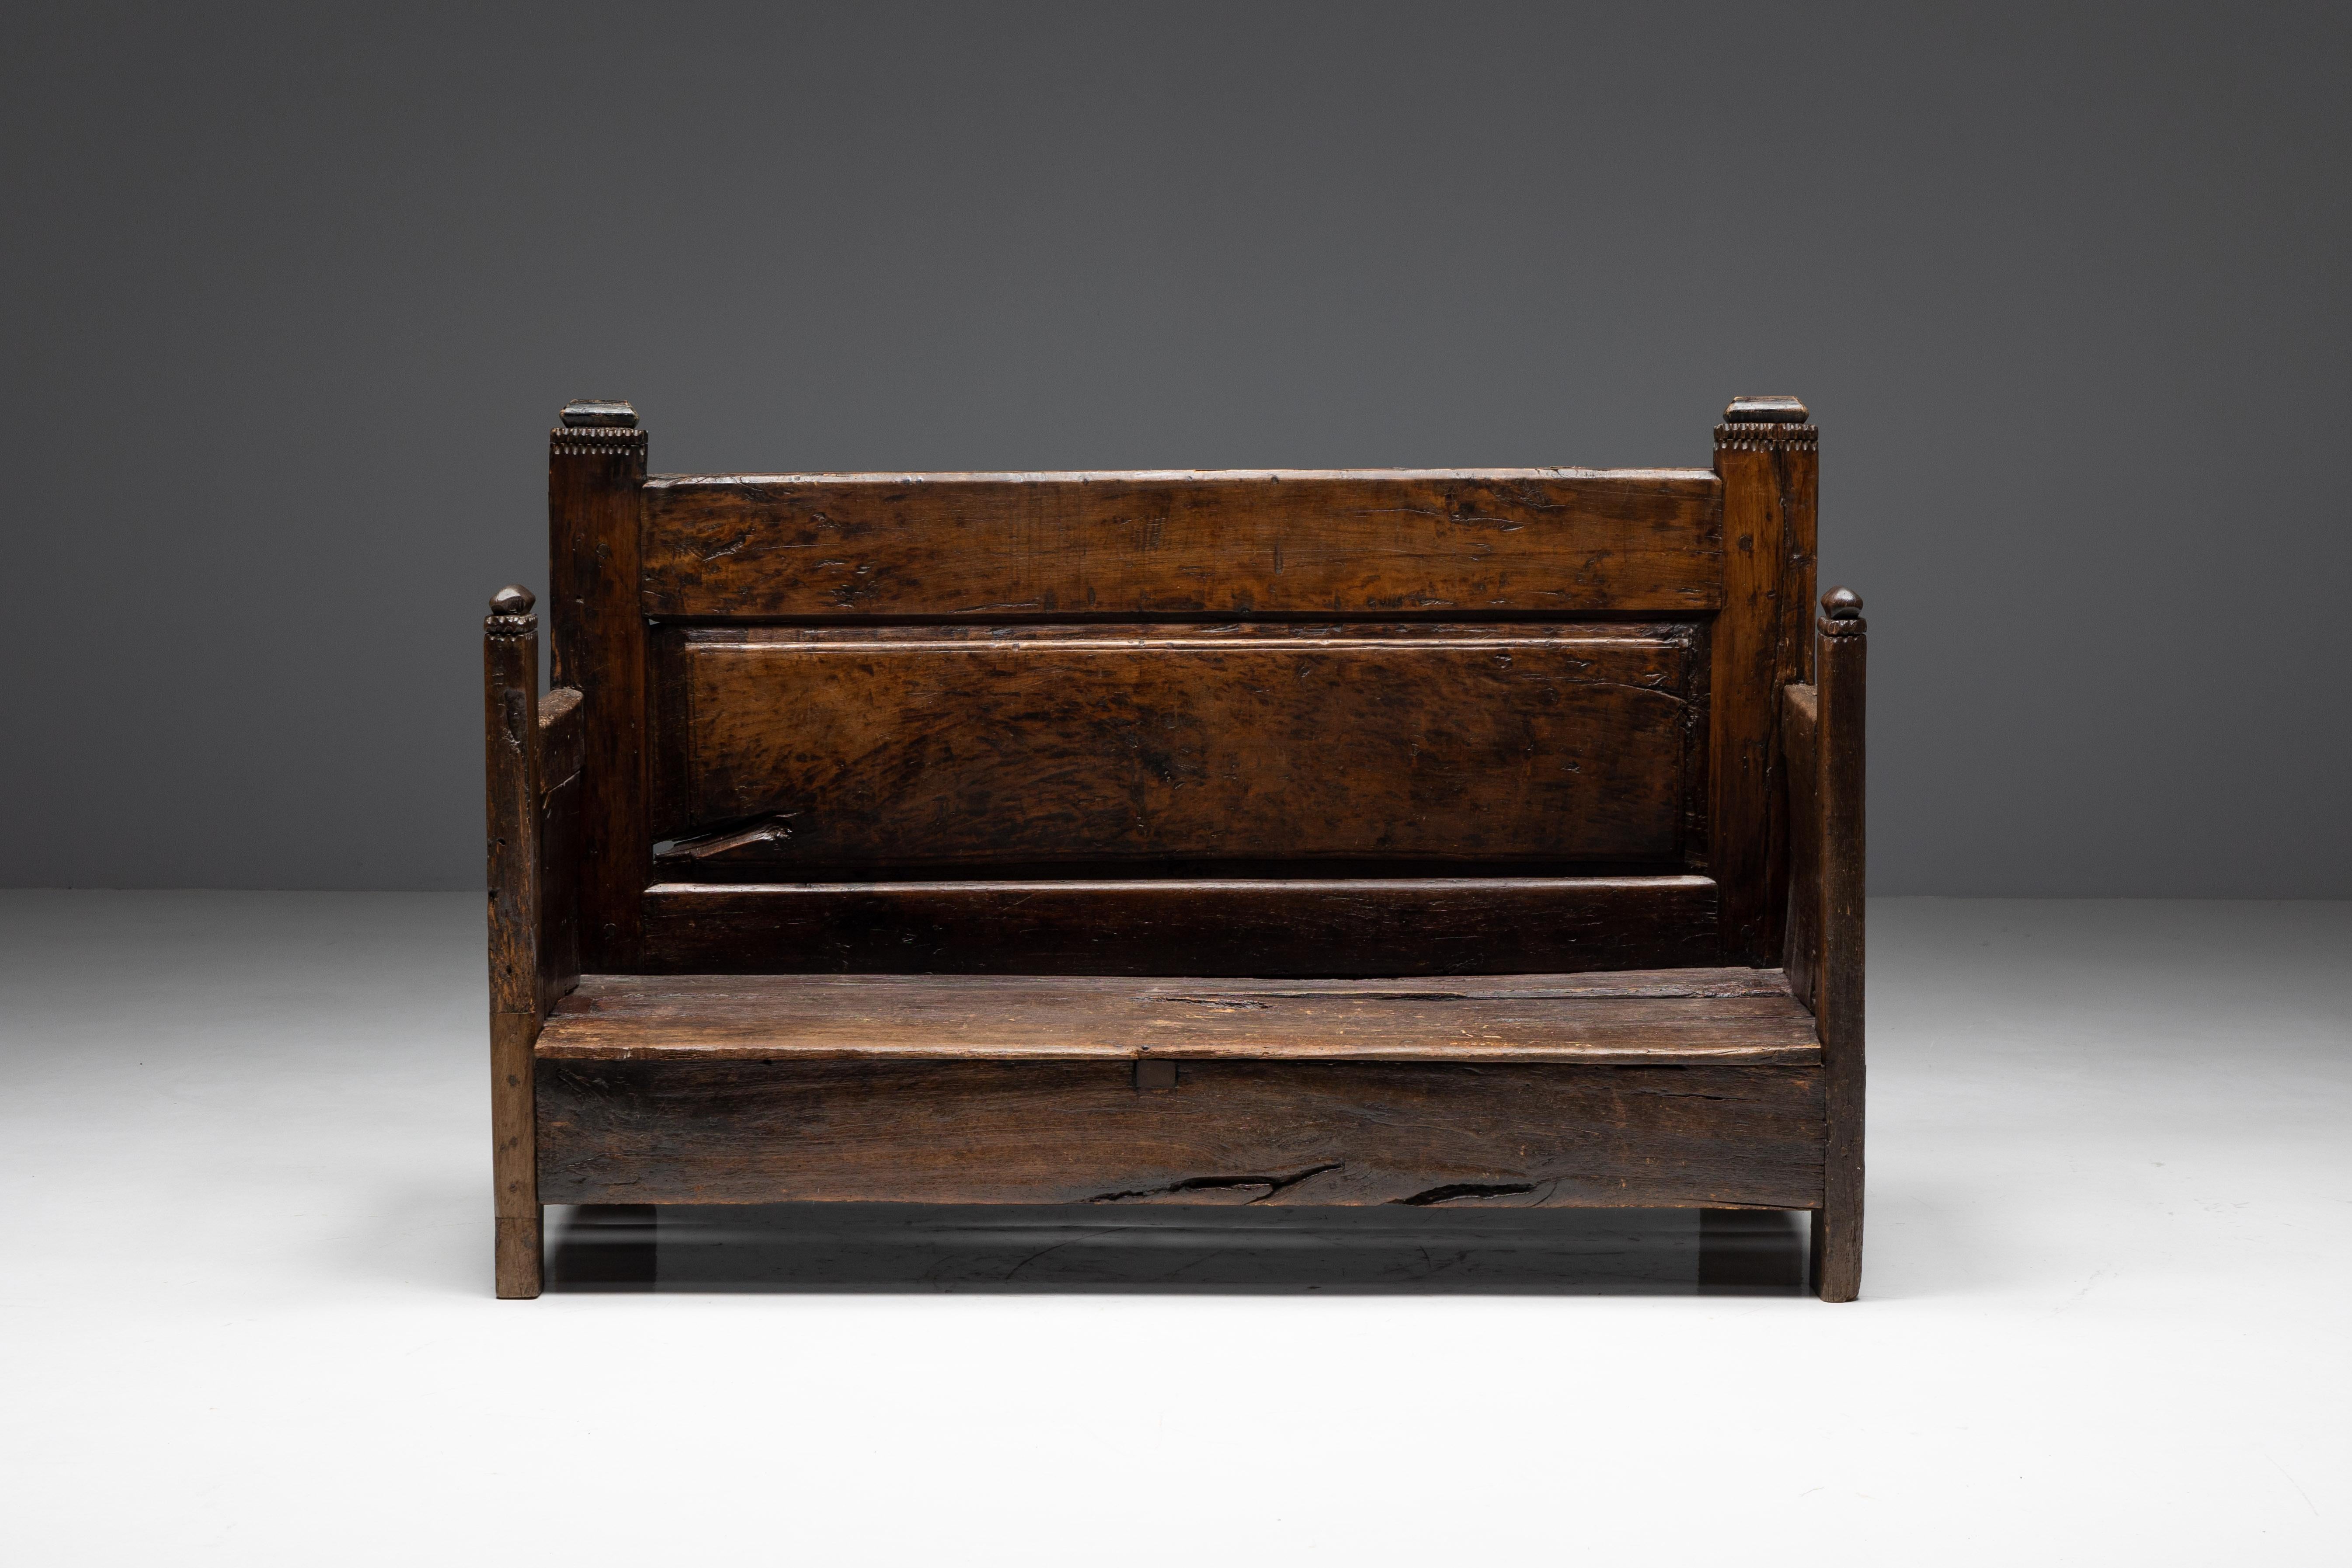 Rustic art populaire bench from 19th century France, with a charming primitive character. Constructed from sturdy wood, the bench boasts a rich patina that speaks to its age and history. Its simple design features a flat seat and four sturdy legs.